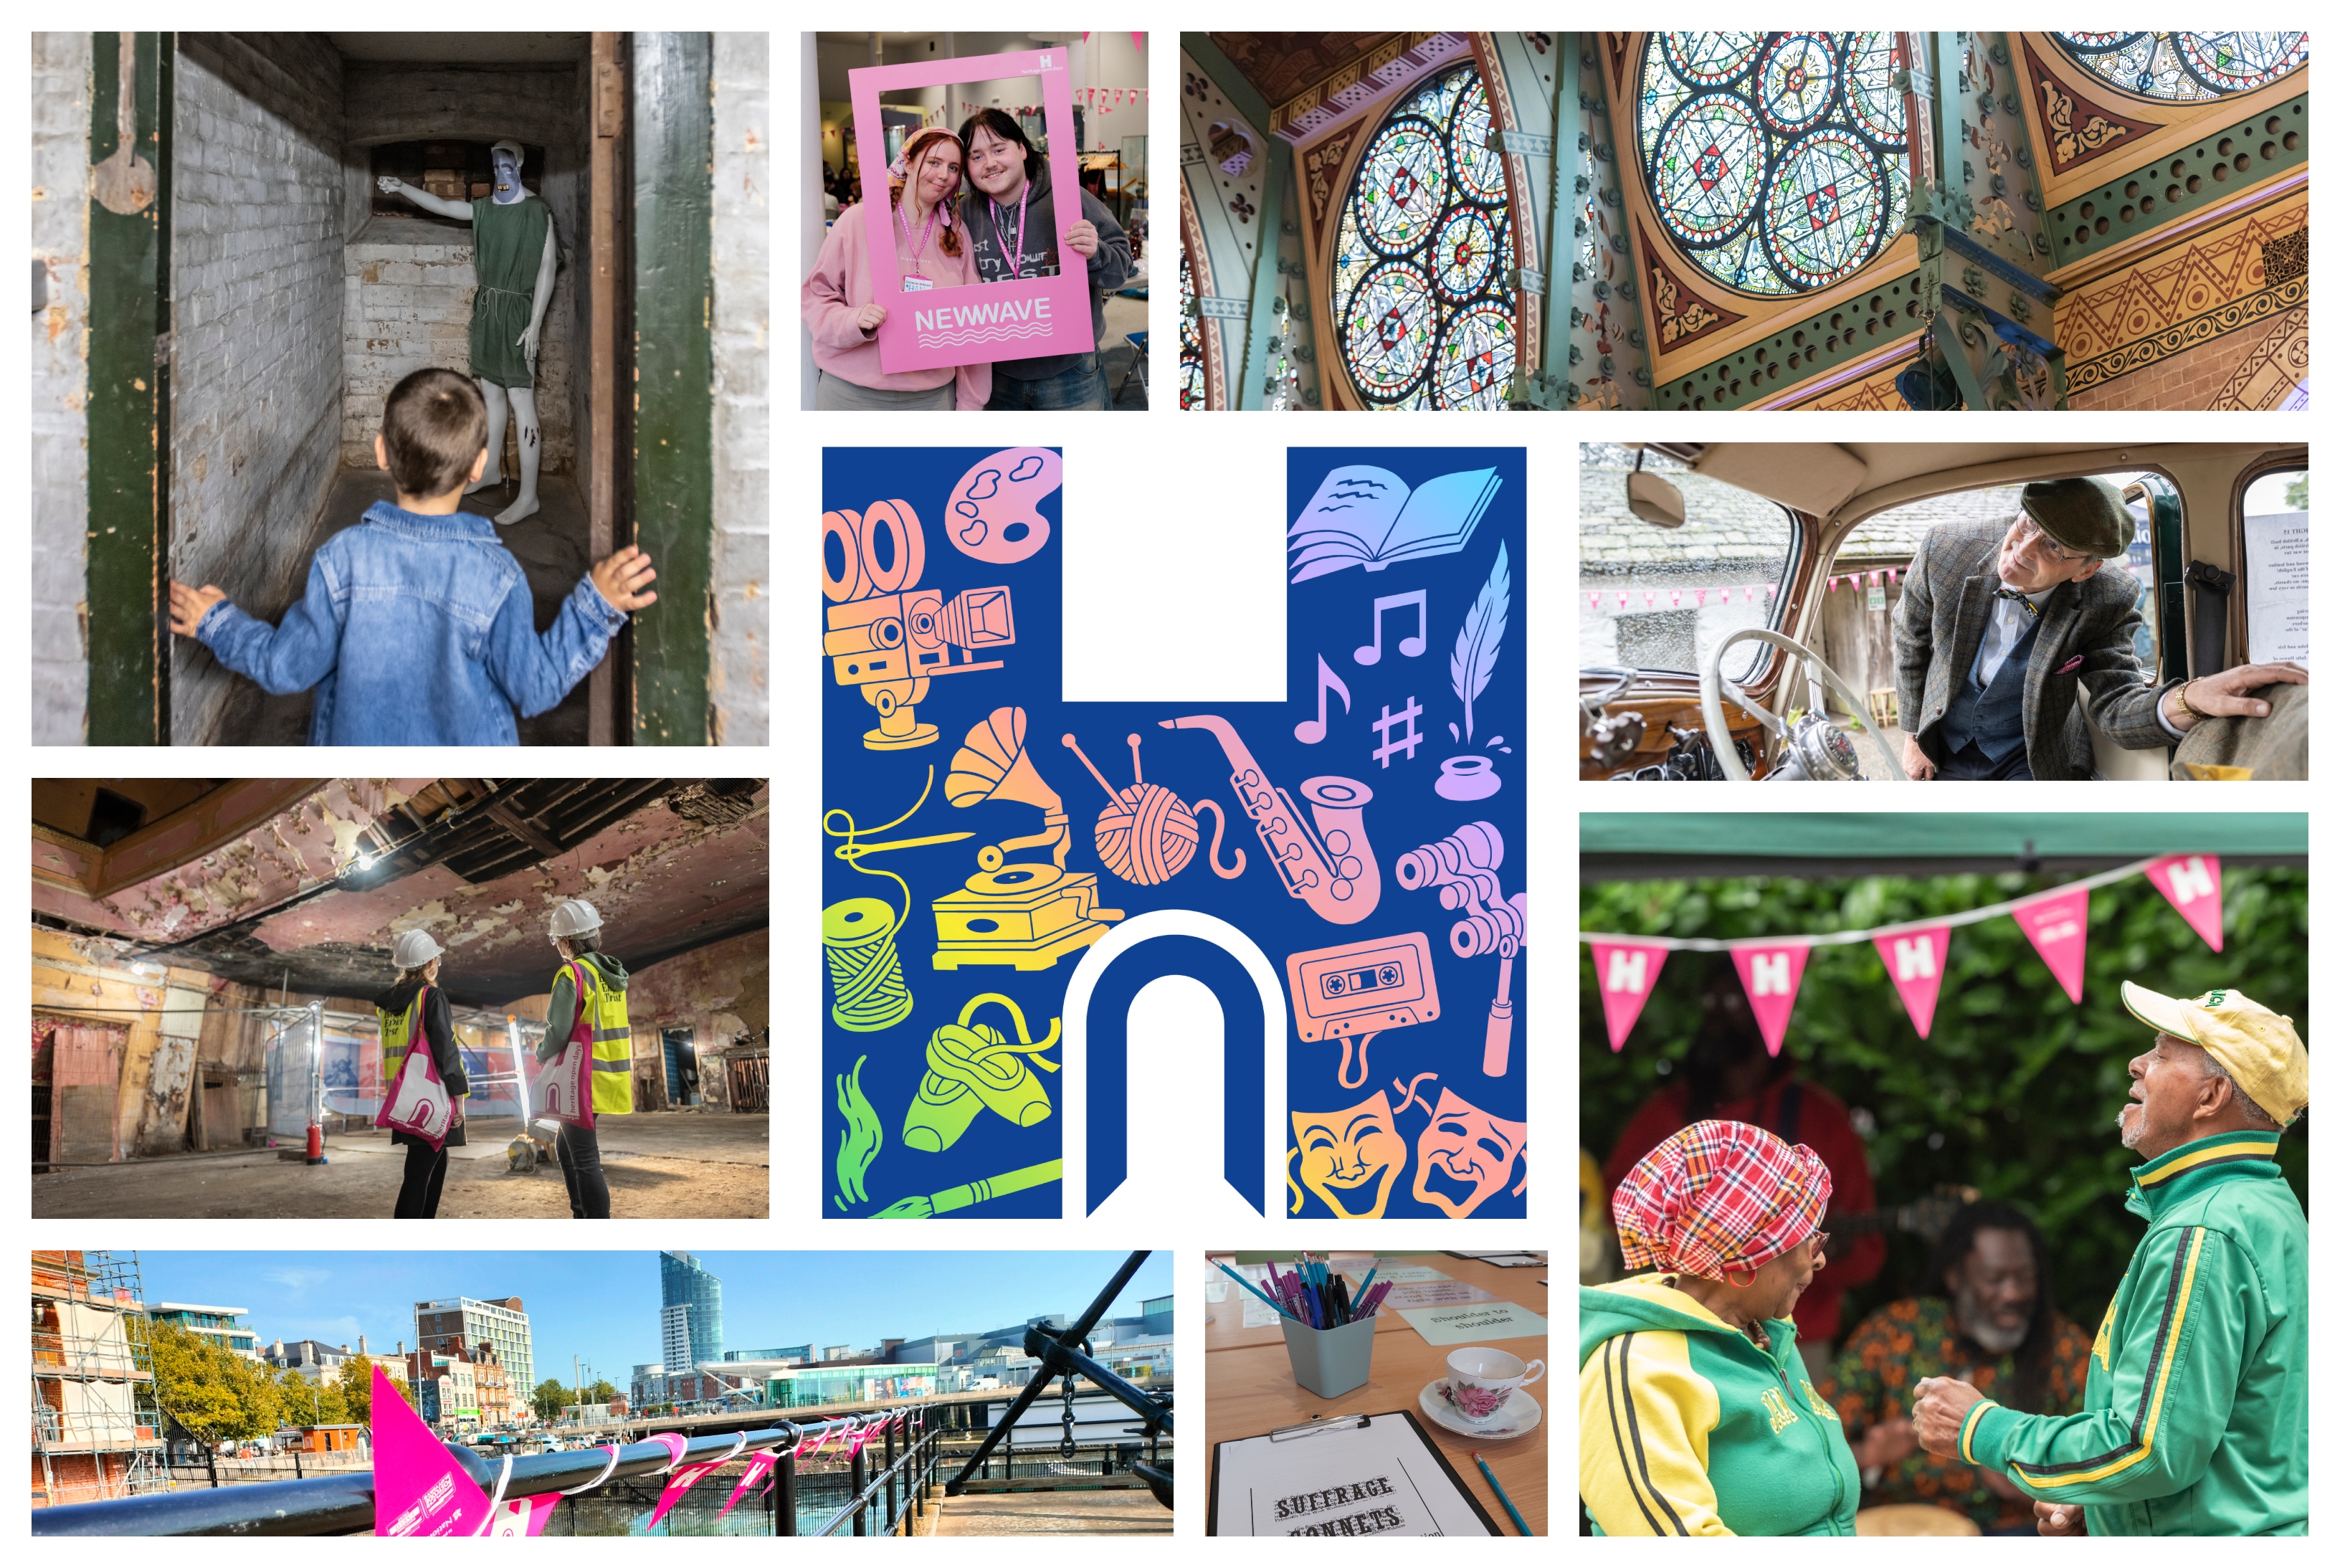 Mosaic of photographs from the festival showing people dancing, looking at a dilapidated building, a vintage car, bunting on a pier, a child in a doorway.